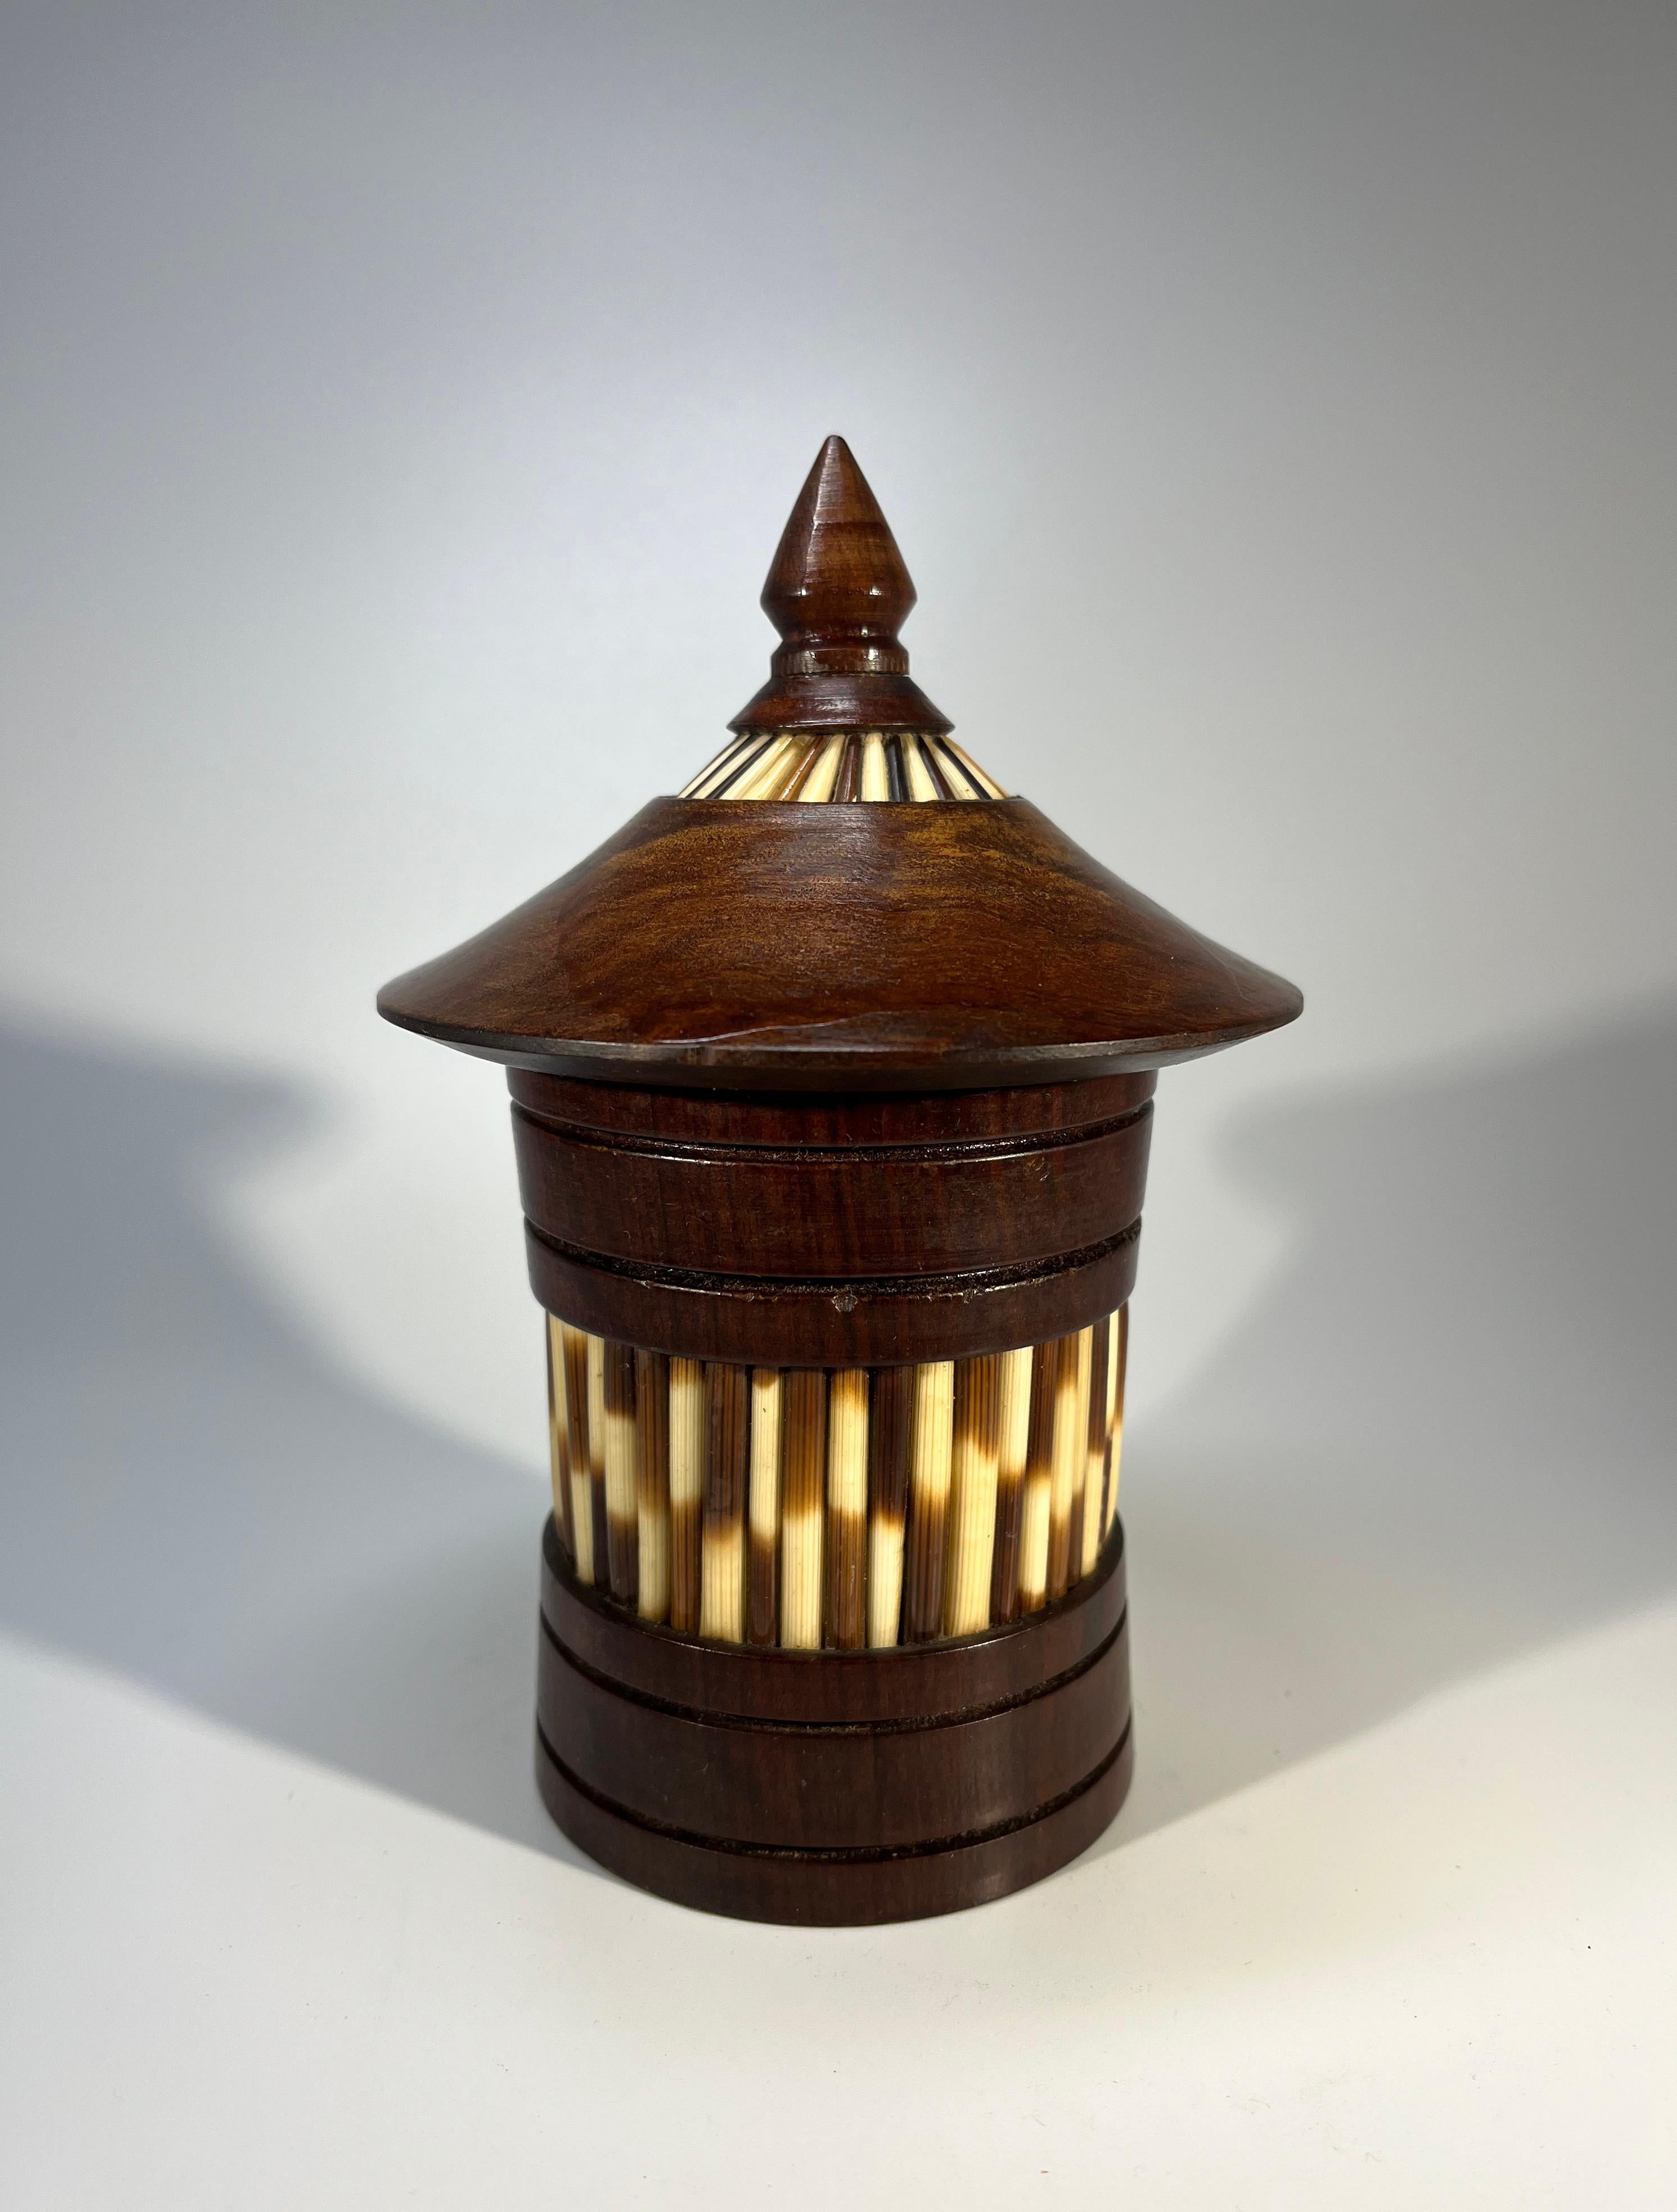 Hardwood Beautifully Styled Ceylonese Porcupine Quill, Lidded Dark Wood Conical Pot For Sale